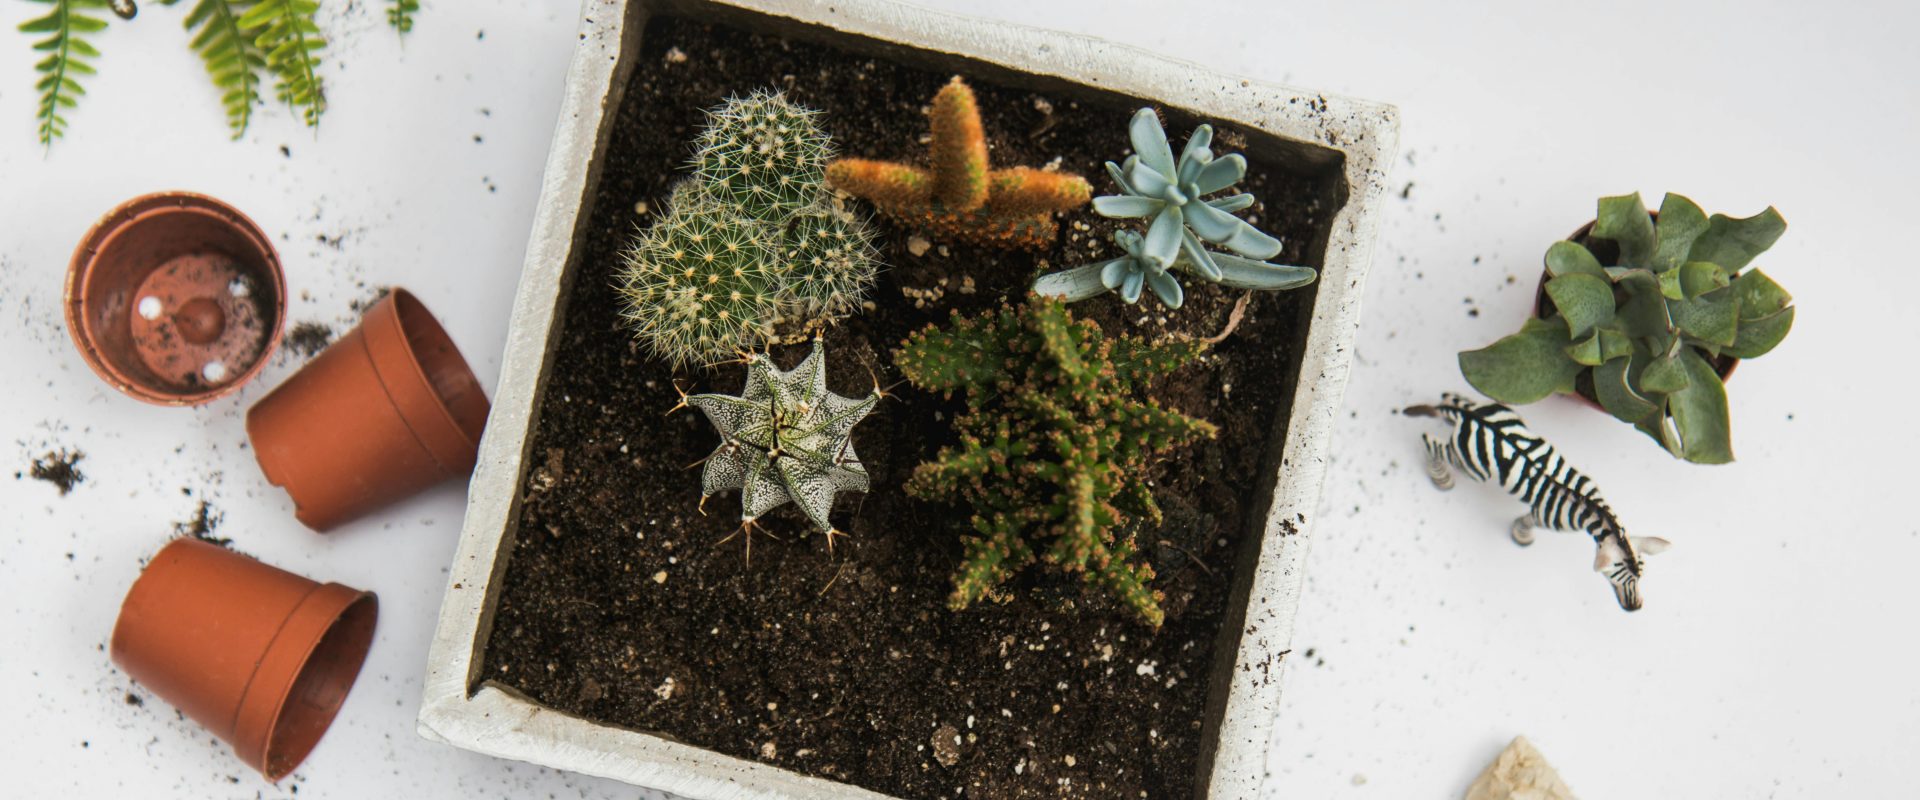 a container with plants